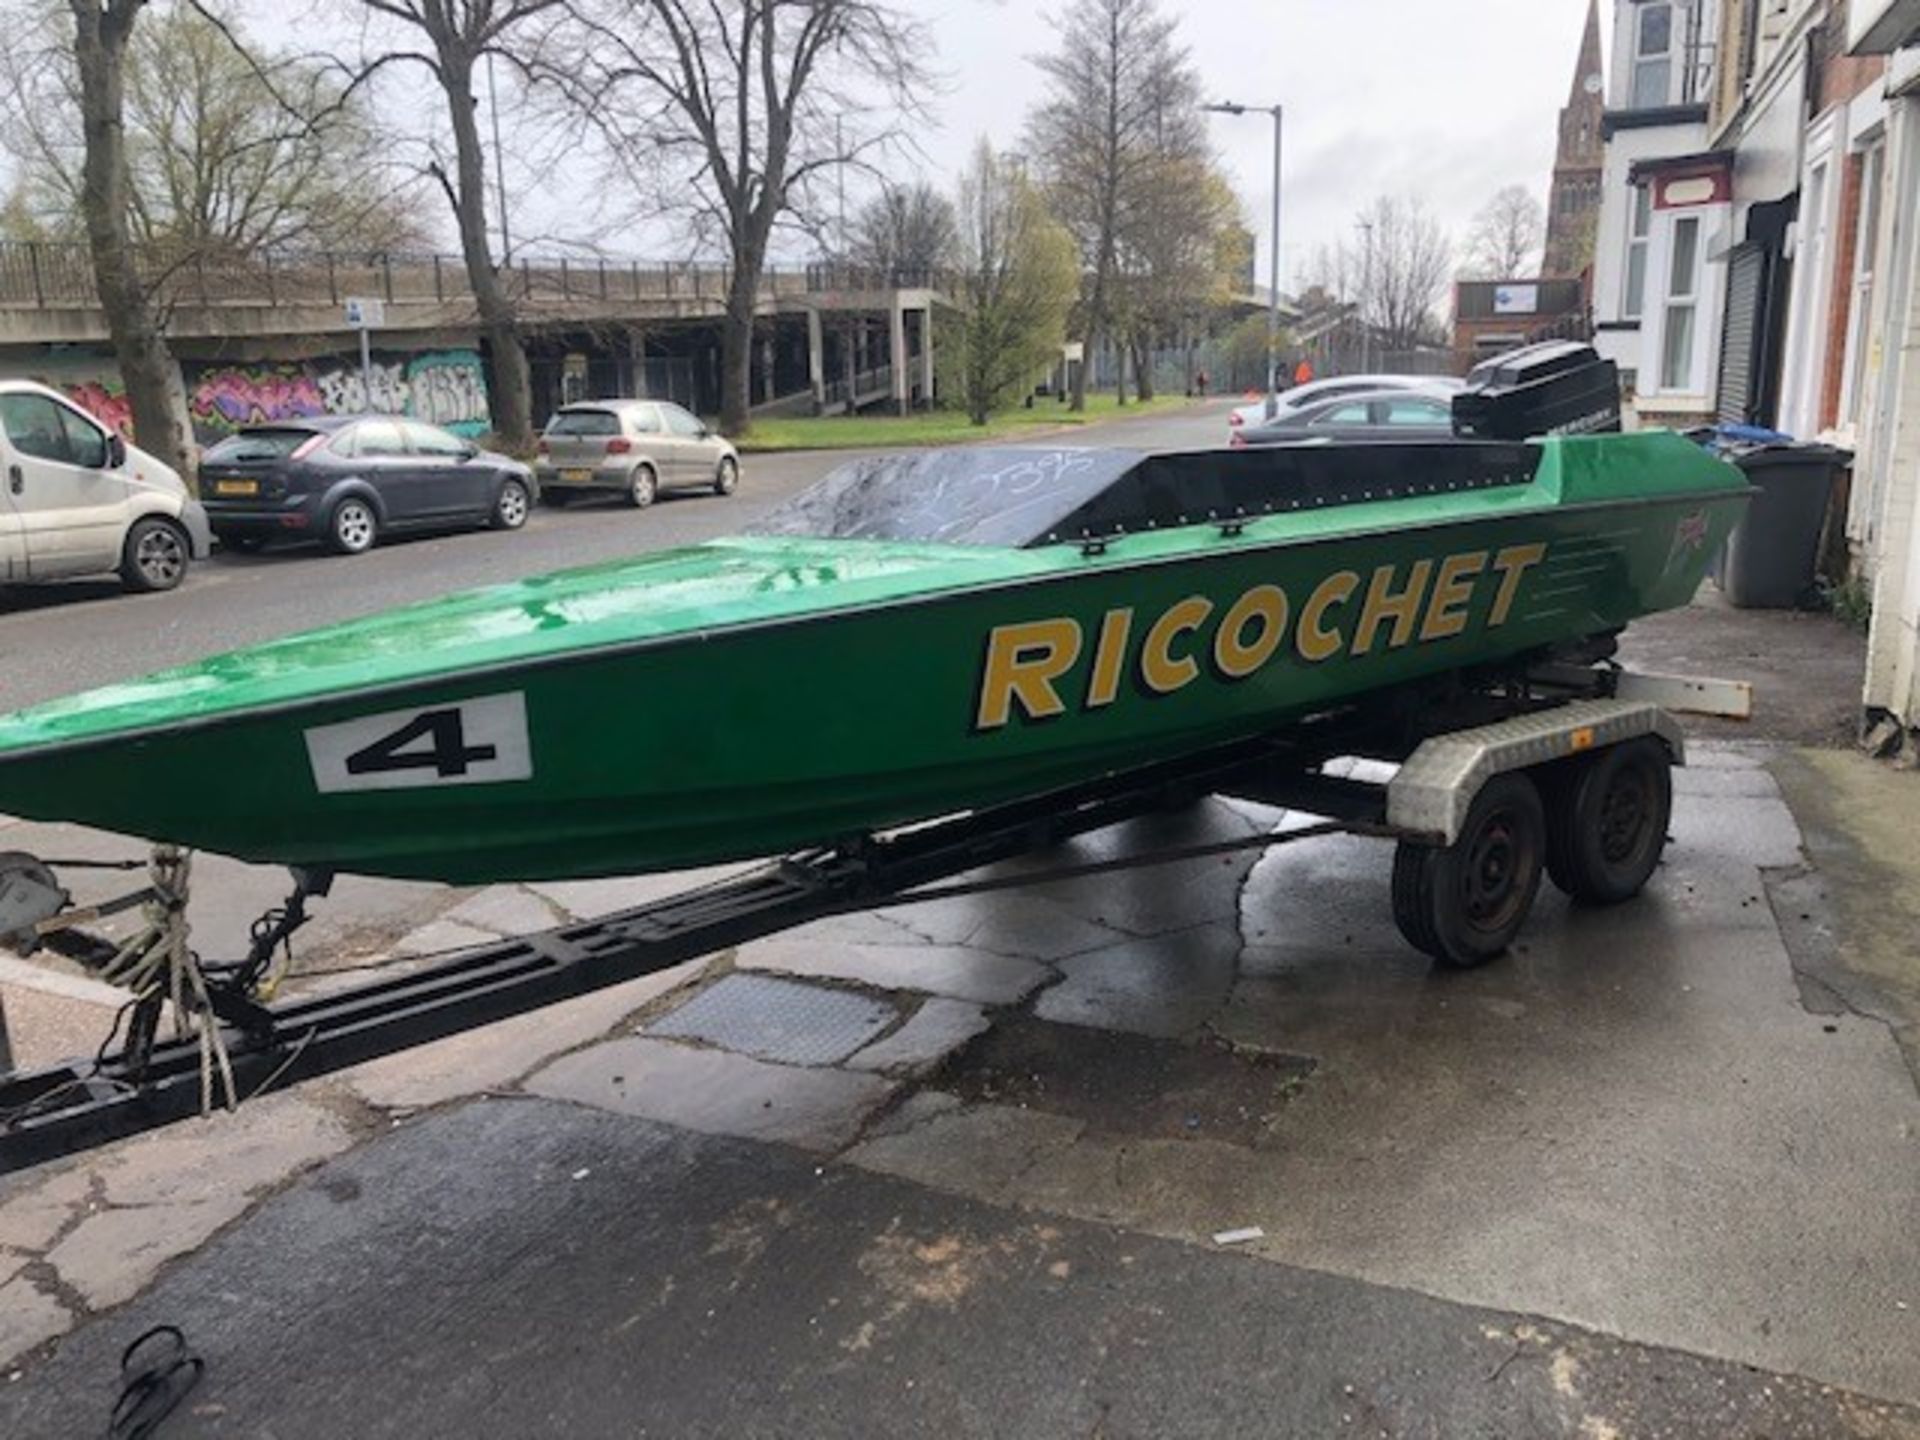 Ring 20ft 4 Person Speedboat "Ricochet" with Recently Reconditioned Mercury 135HP 2 Stroke Outboard - Image 4 of 5